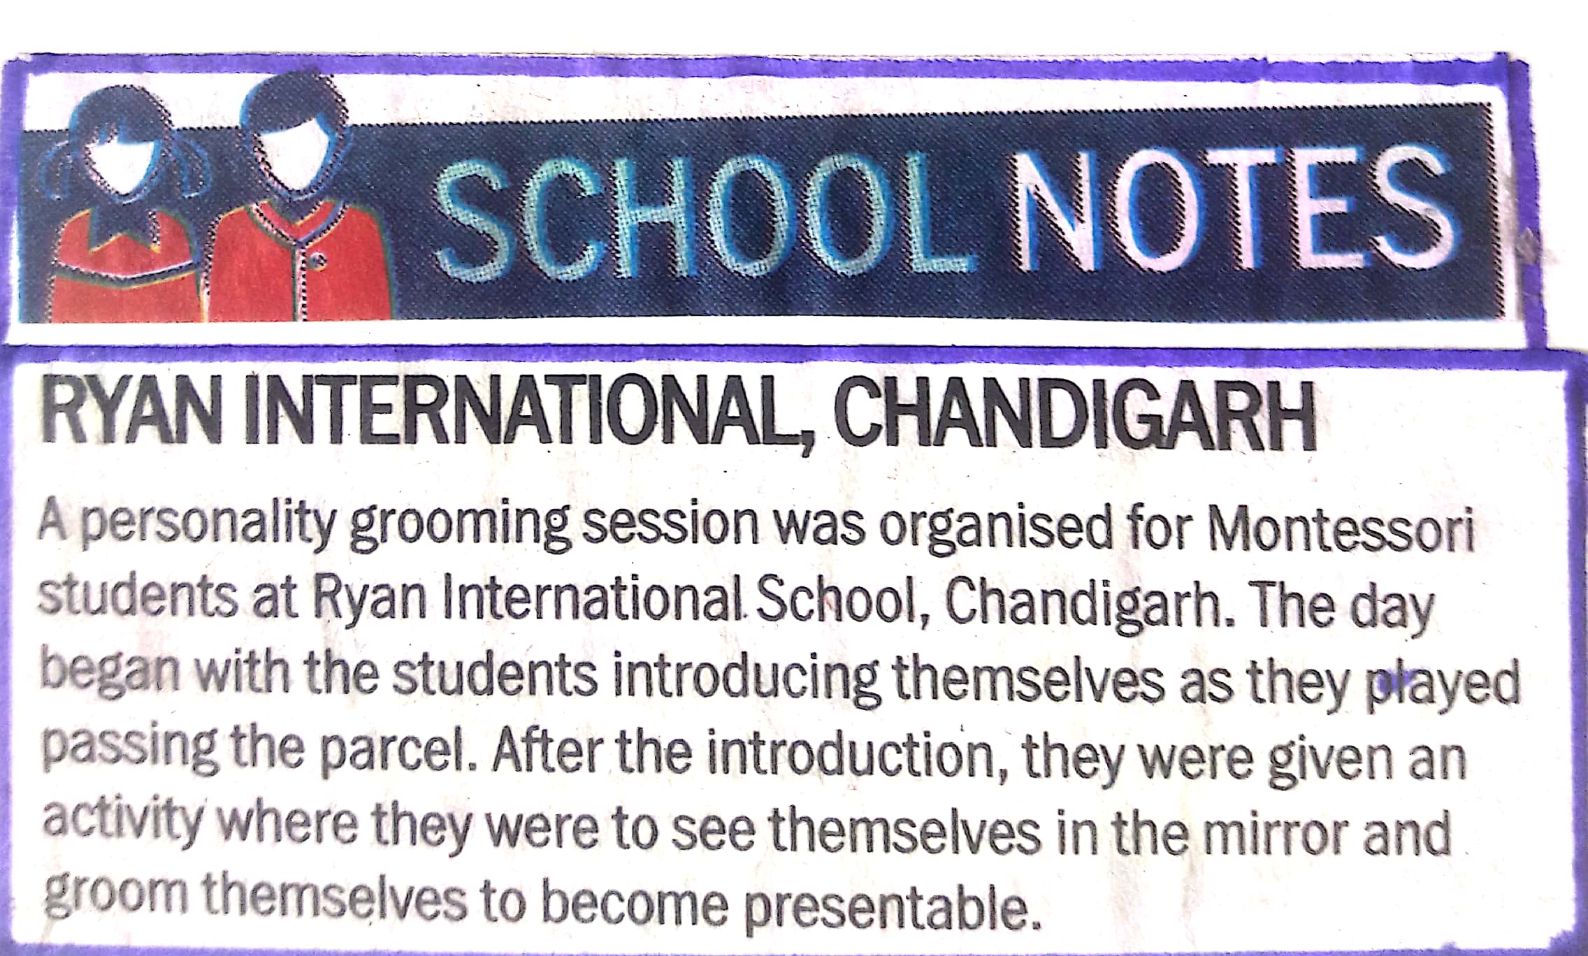 Personality Grooming Session was featured in The Times of India - Ryan International School, Chandigarh